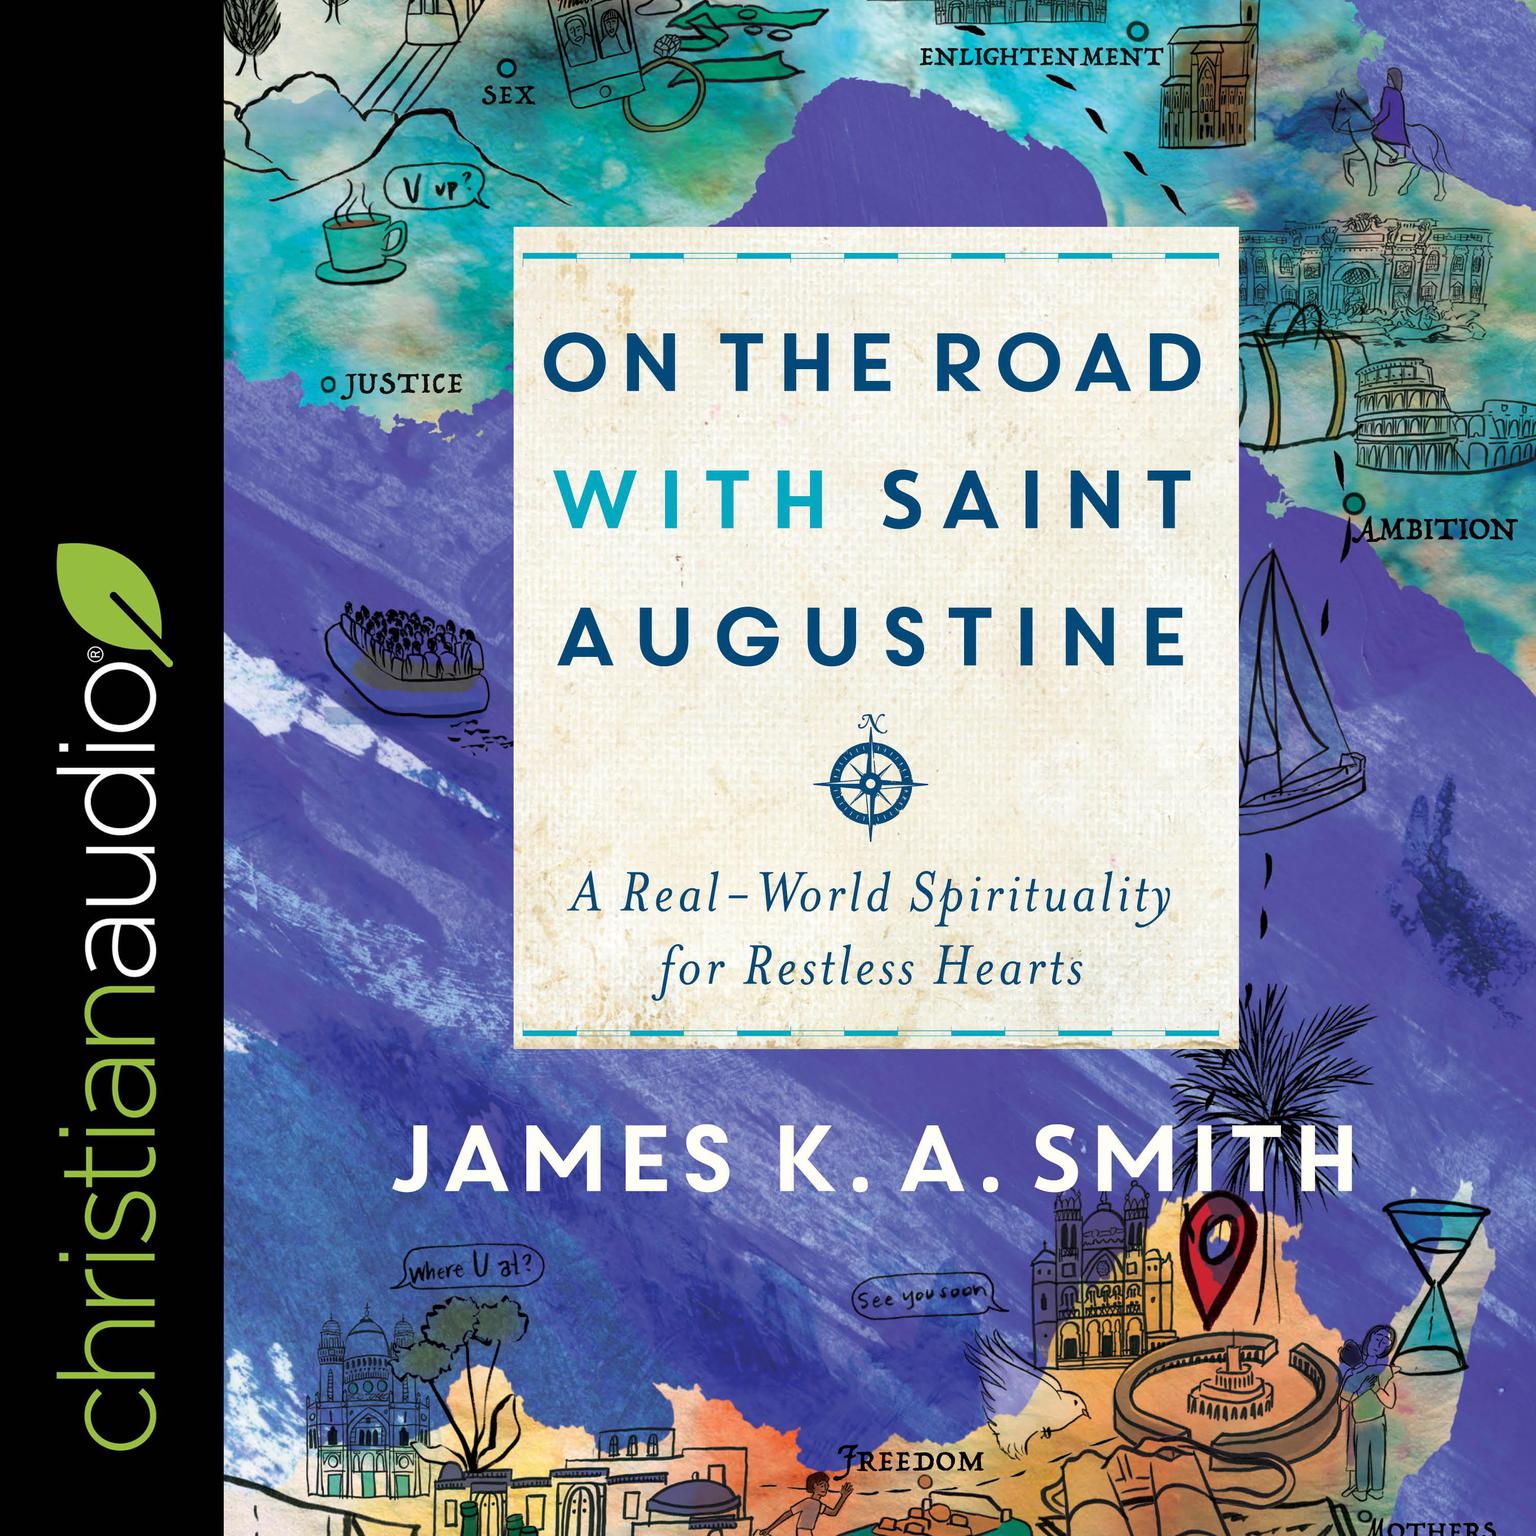 On the Road with Saint Augustine: A Real-World Spirituality for Restless Hearts Audiobook, by James K. A. Smith